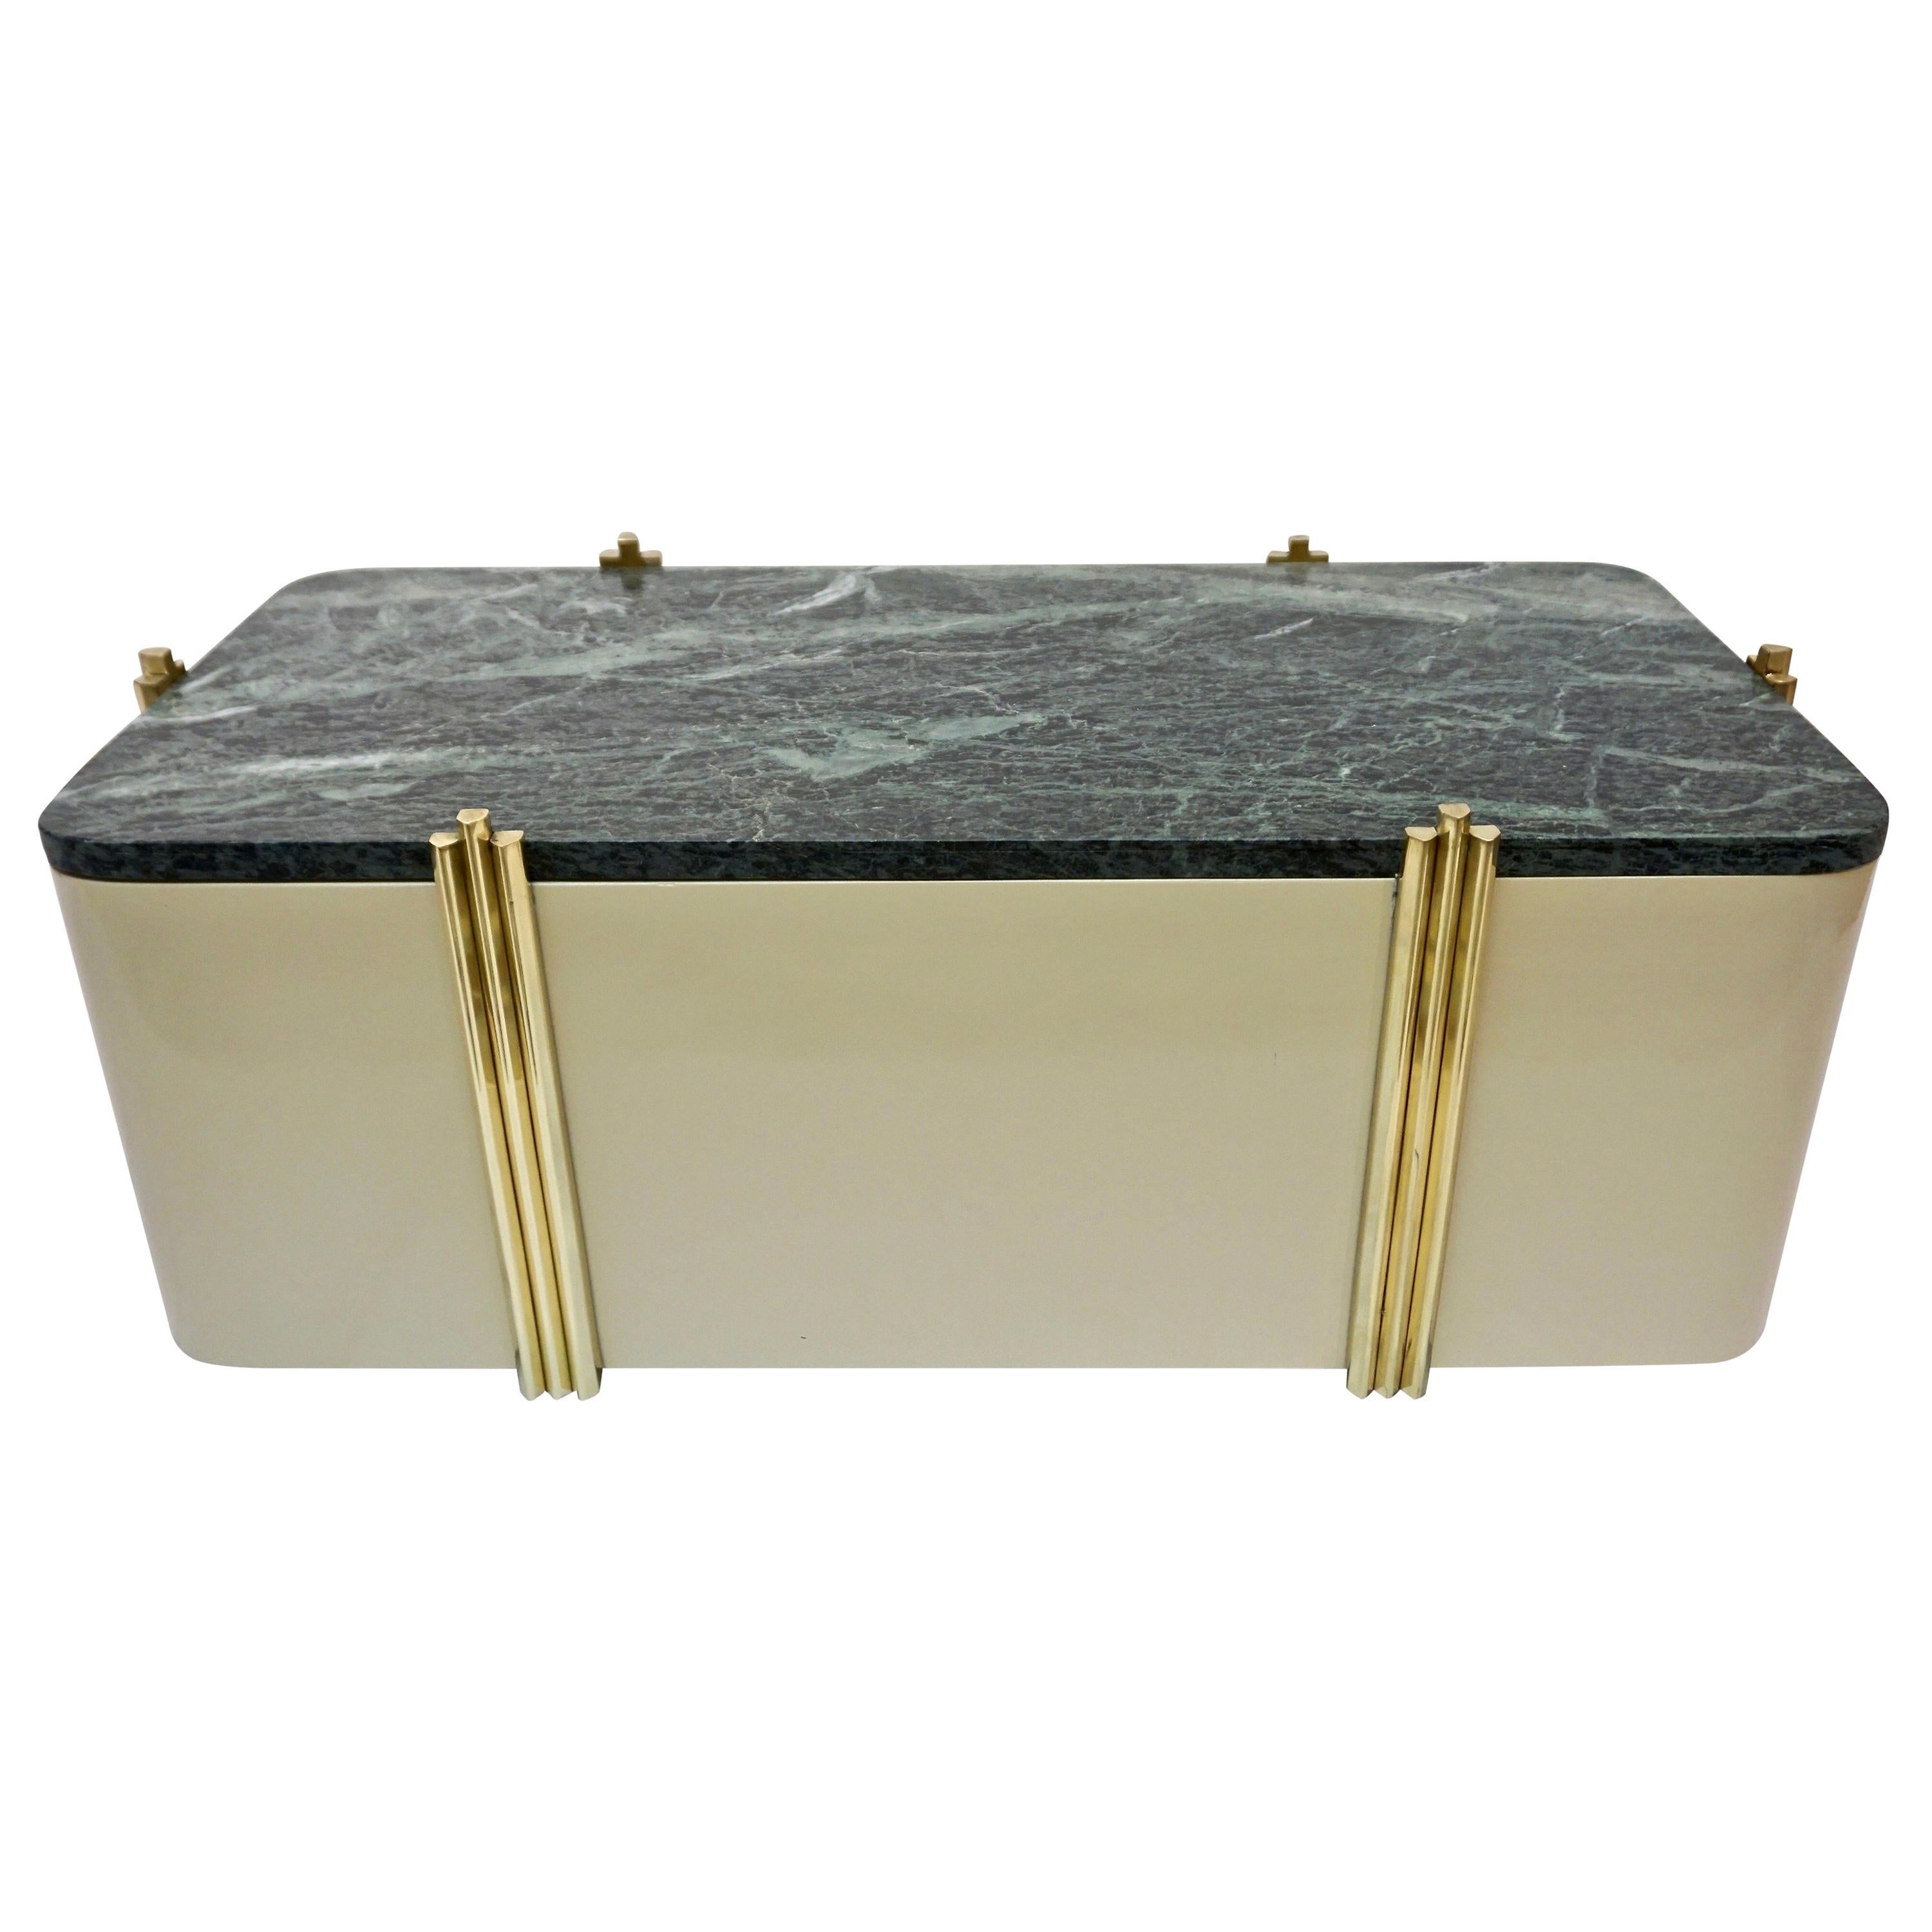 1970s Art Deco Design Green Marble & Cream White Lacquered Coffee Table / Bench For Sale